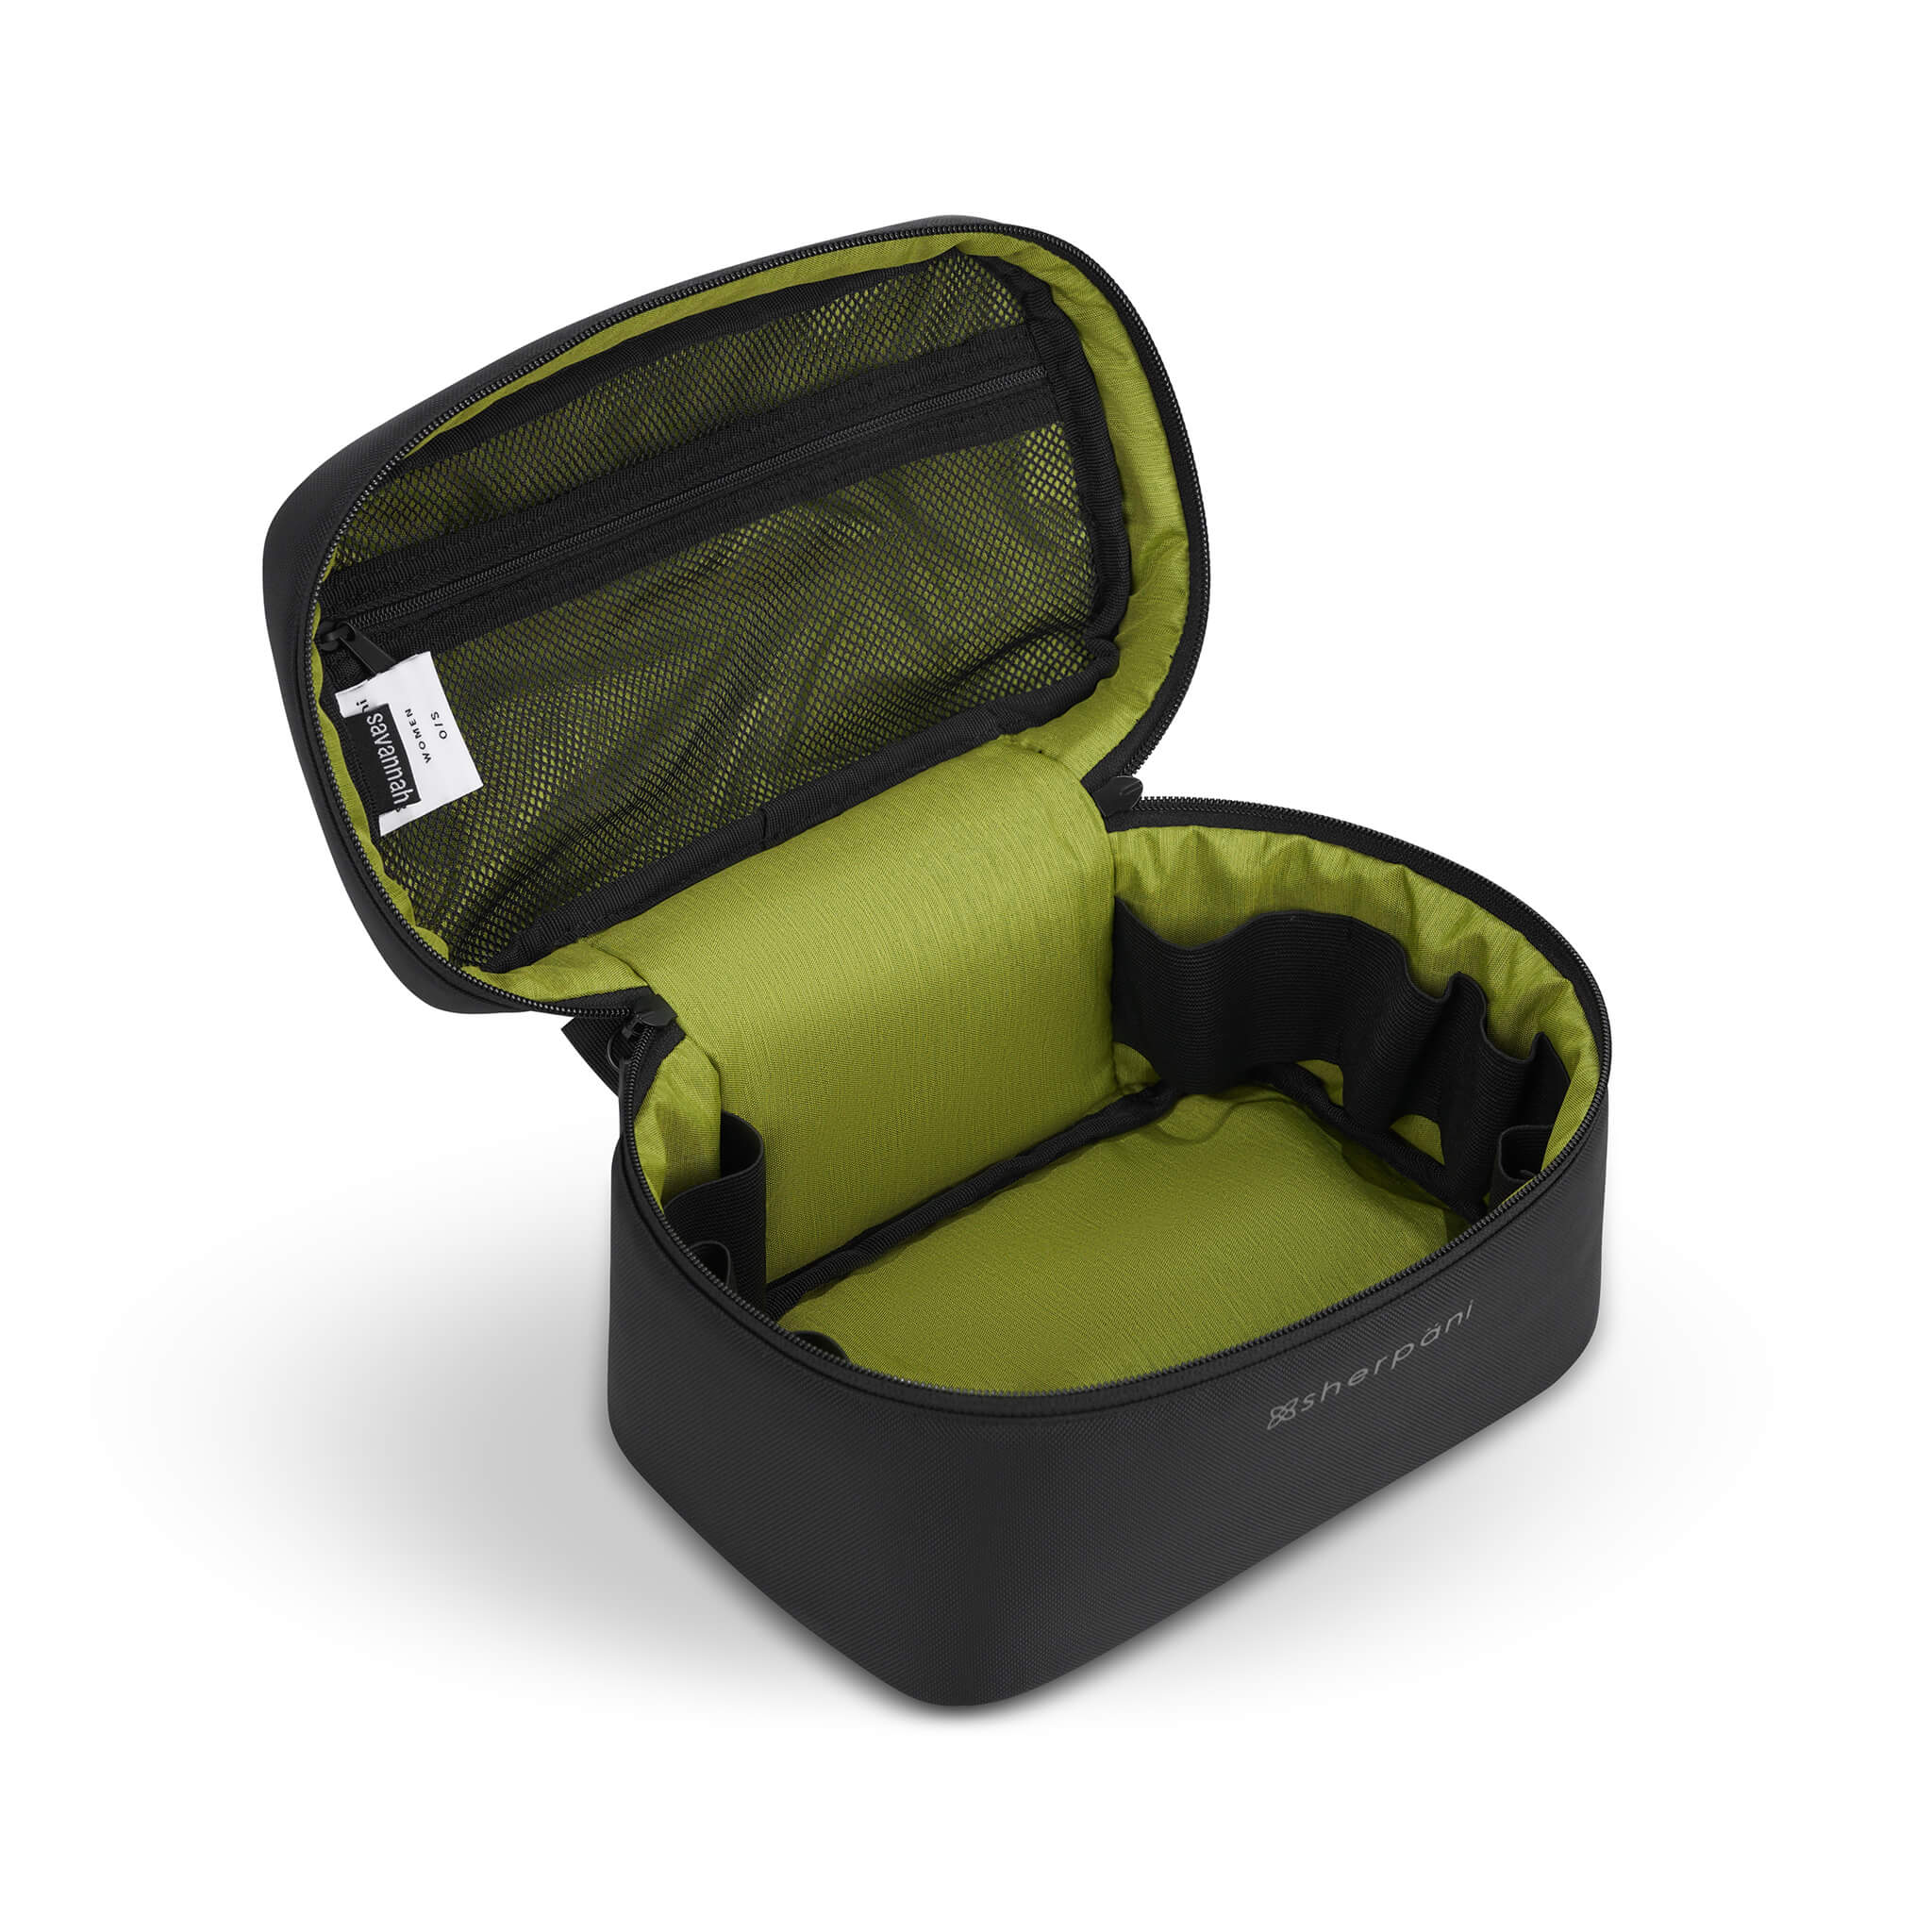 Inside view of Sherpani travel accessory the Savannah. The interior is lime green. There is a zippered mesh compartment on the top of the case. An elastic band runs along the inside of the case creating organizational slots. 